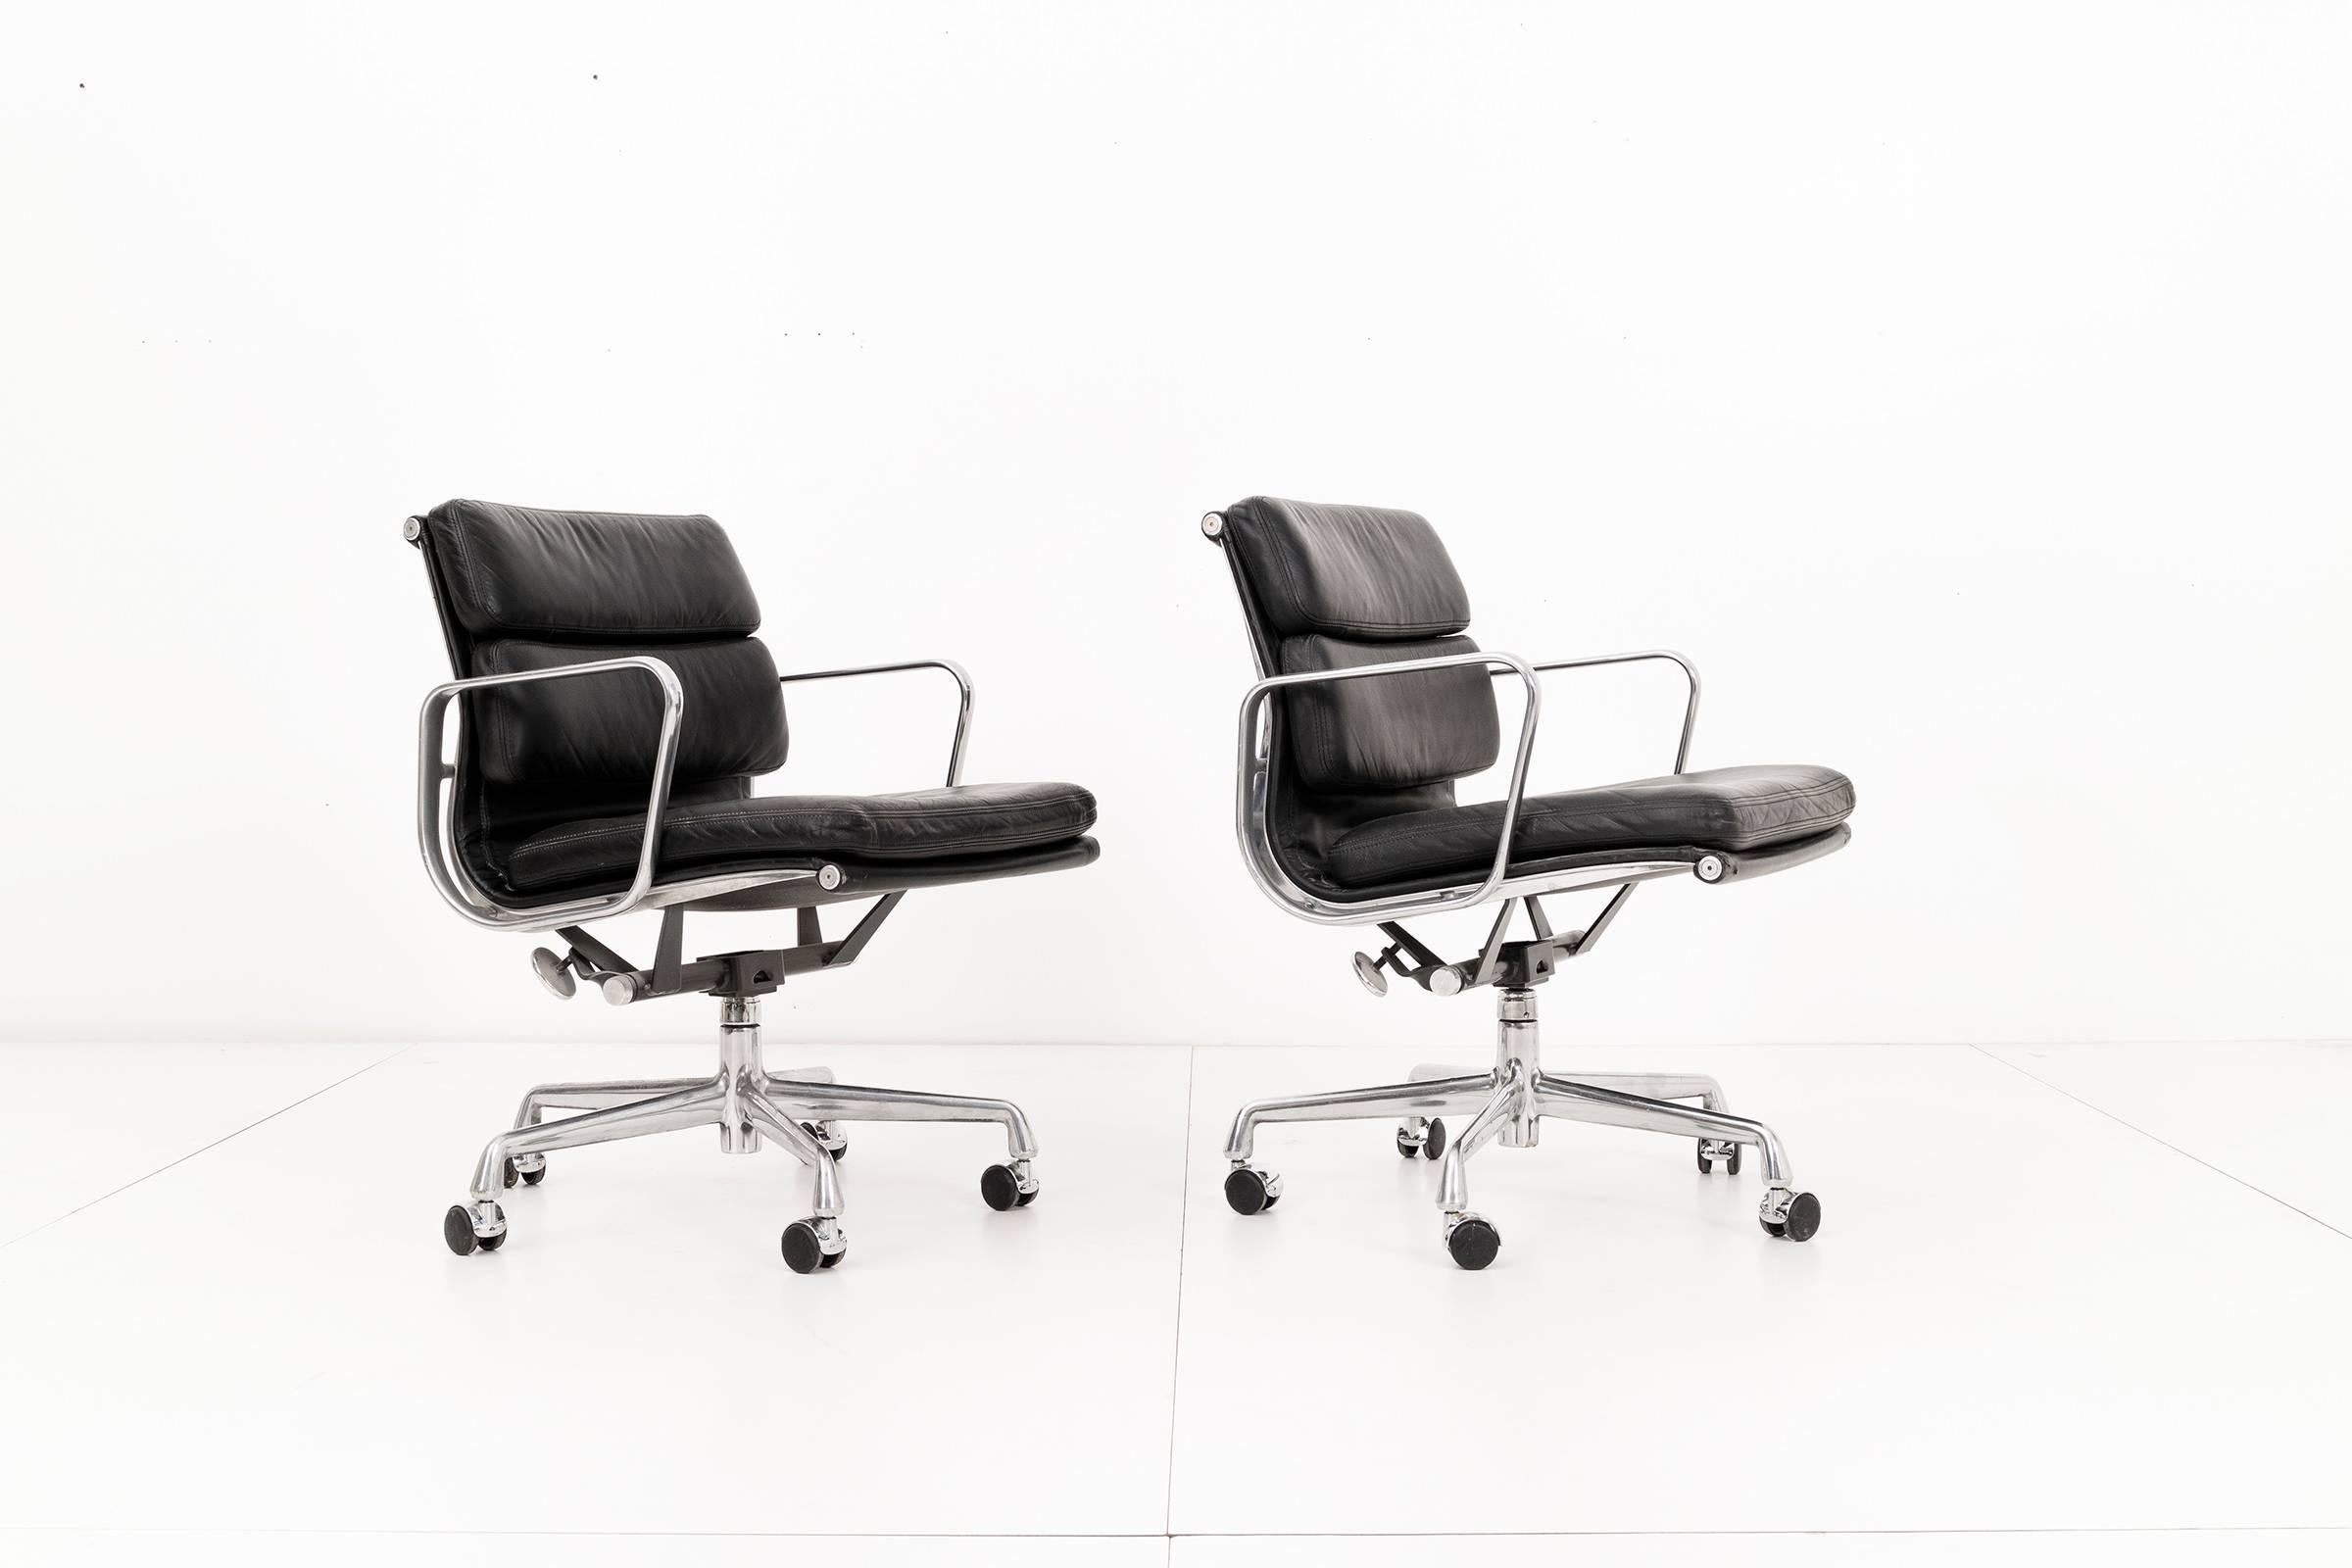 Charles and Ray Eames soft pad collection for Herman Miller. This pair of chairs, styled similarly to the aluminum group, feature plush padded seats and back cushions. The Classic black leather upholstery is in excellent vintage condition. The